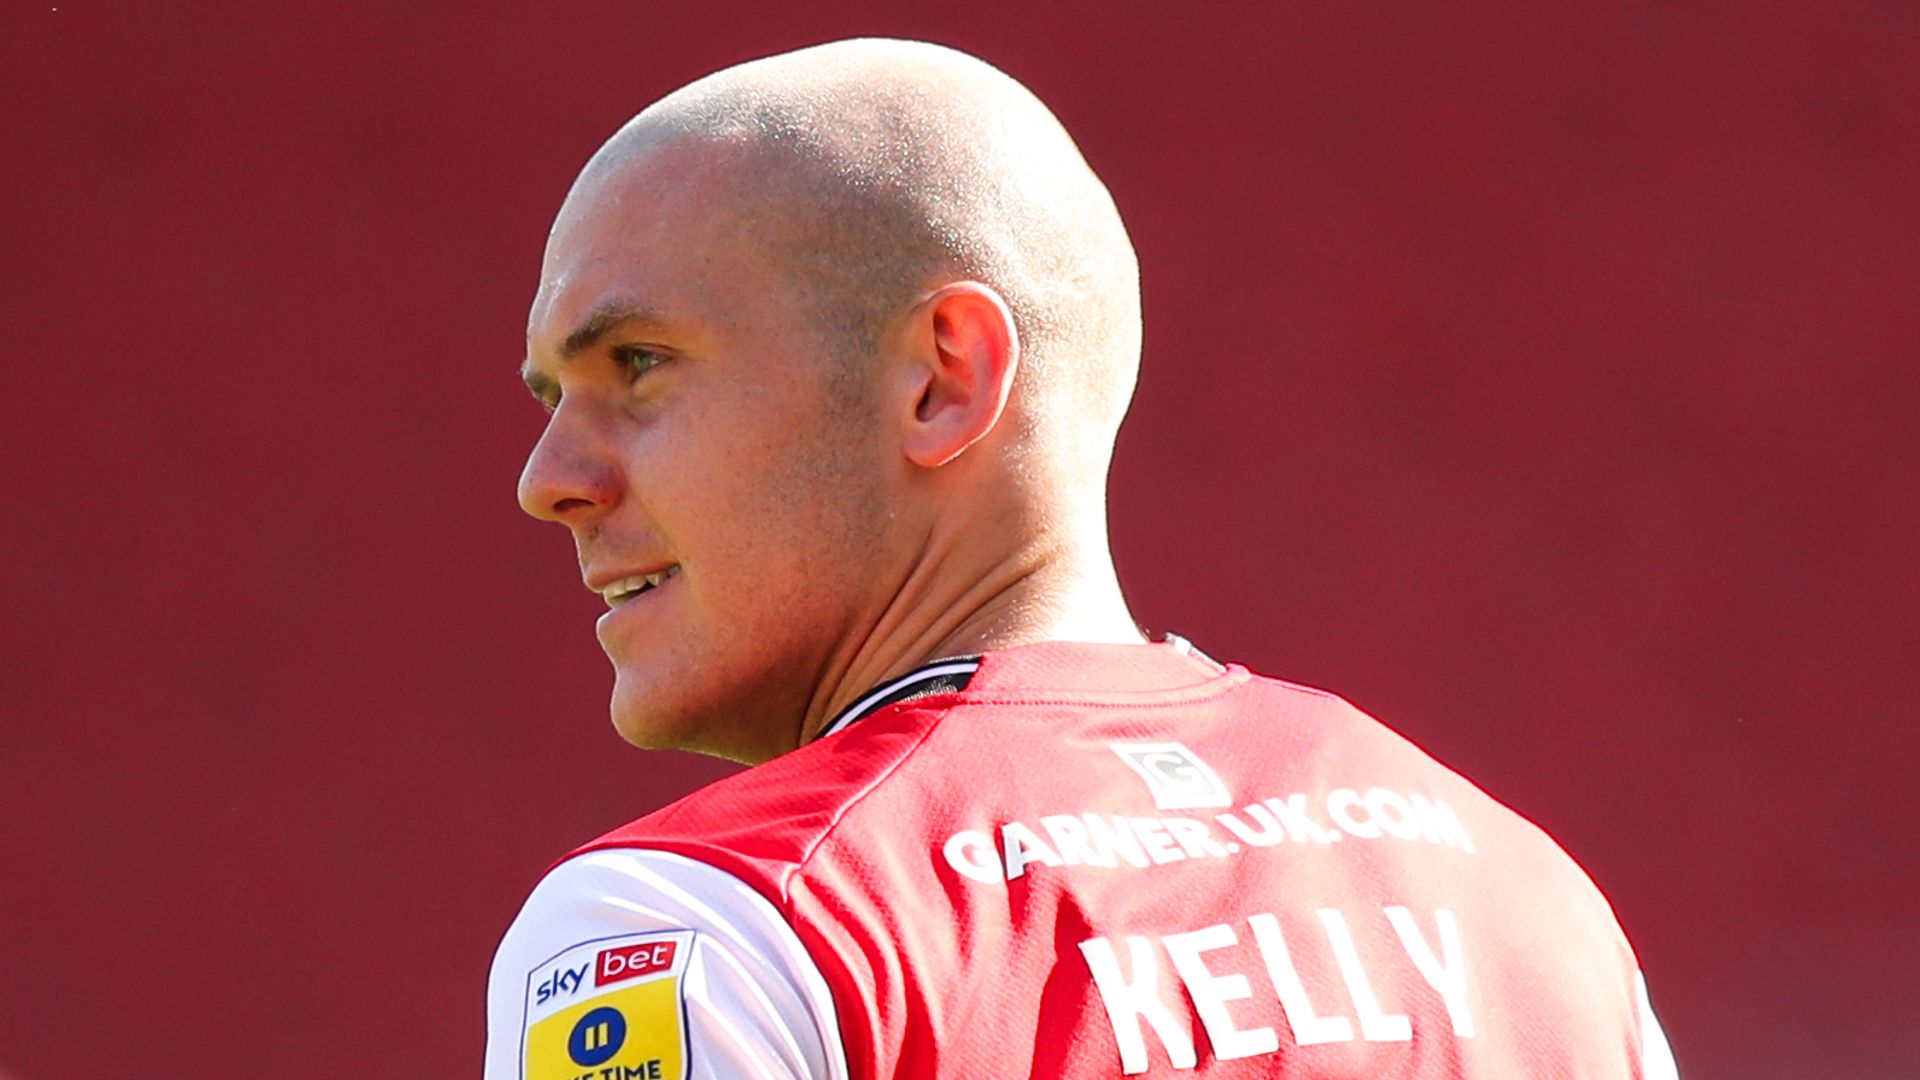 Super-sub Kelly earns Taylor first win as Rotherham boss